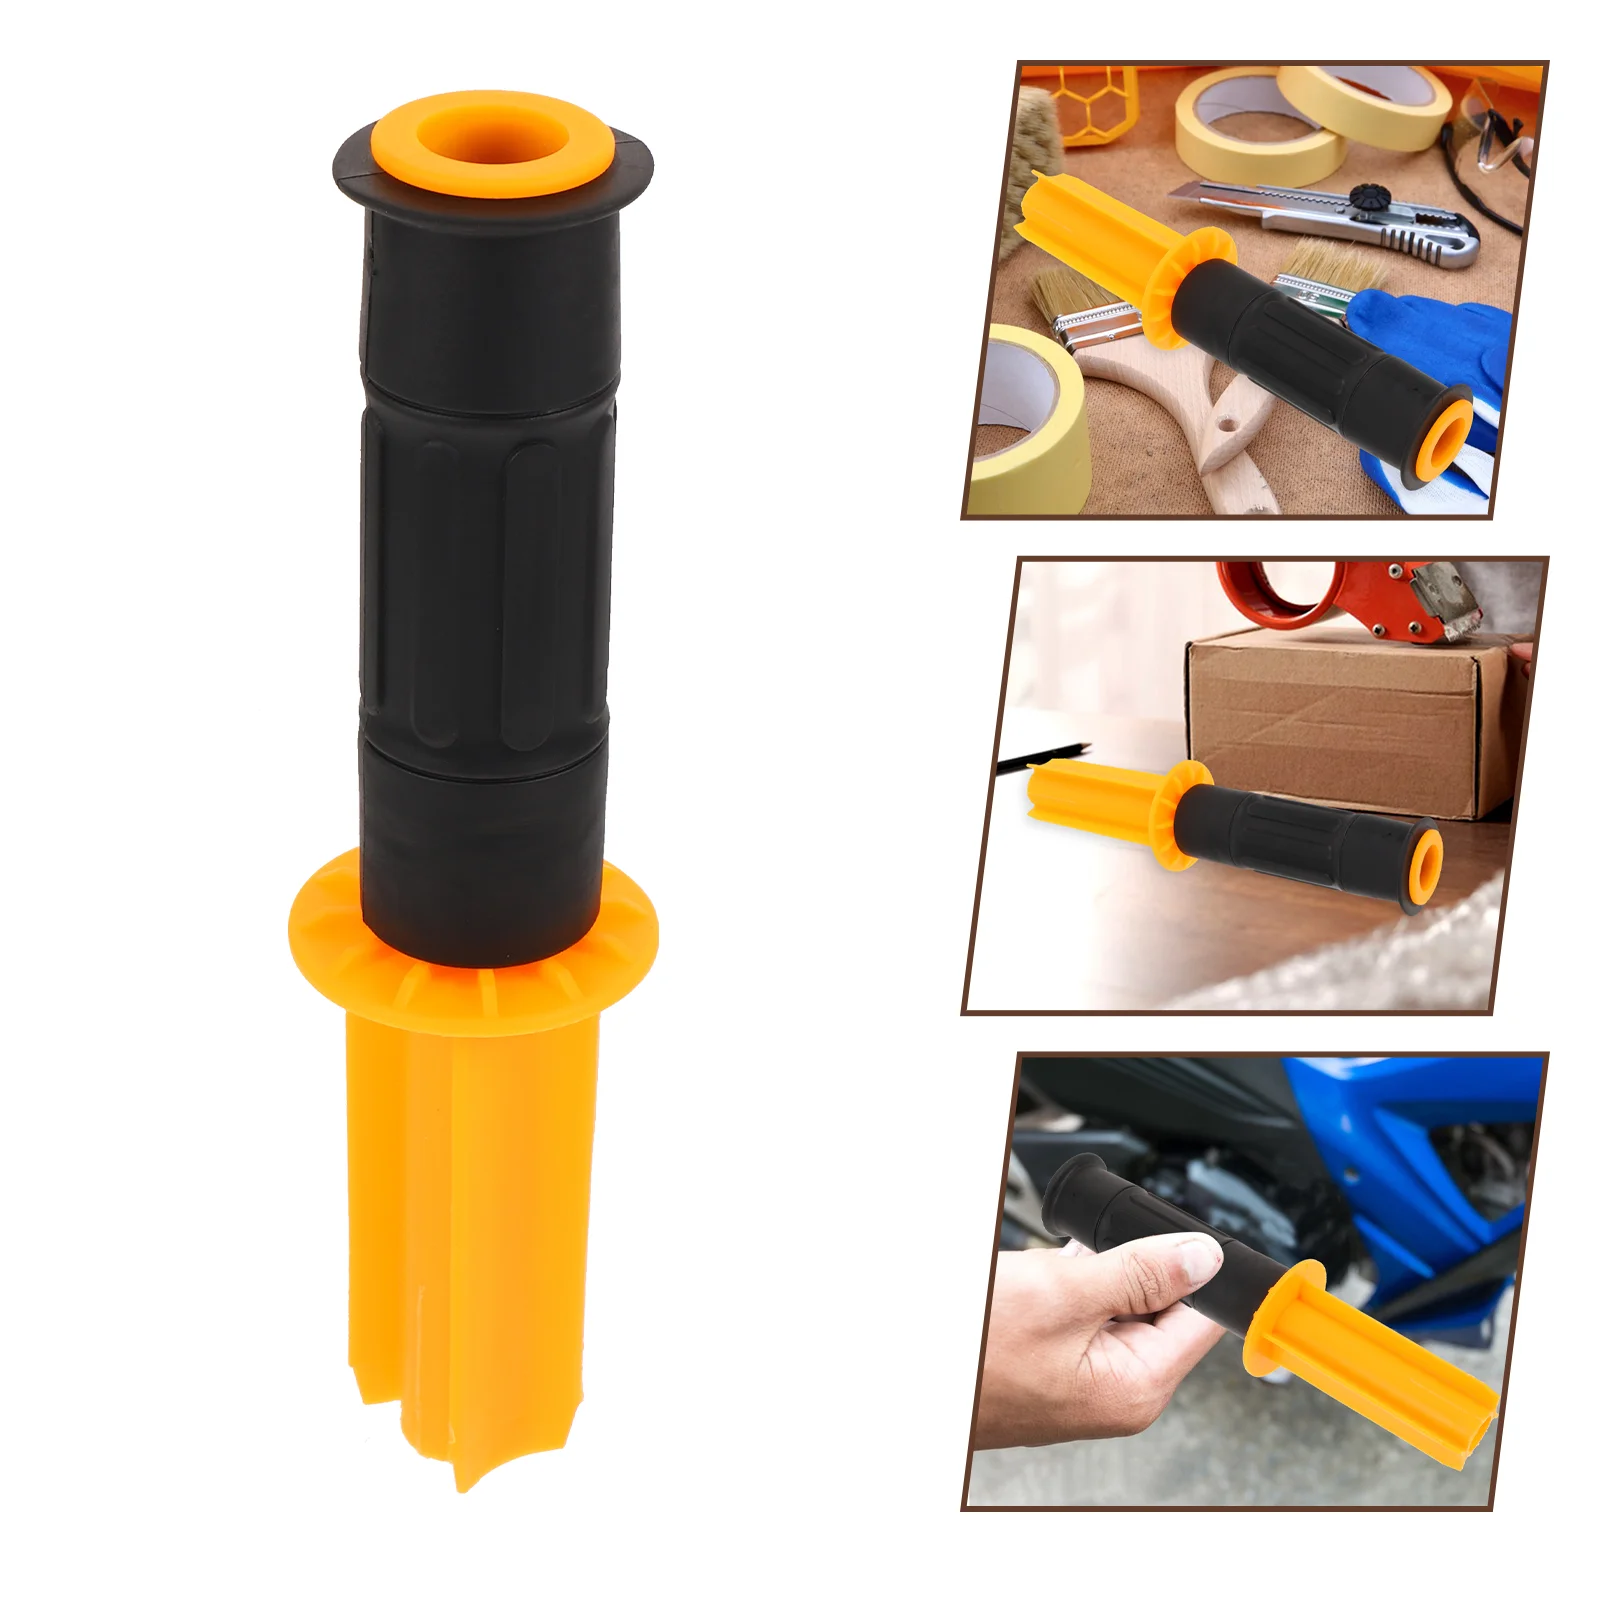 

Balatas Shrink Wrap Handle Pallet Wrapping Combination Stretch Handles Film Rubber Wrapper